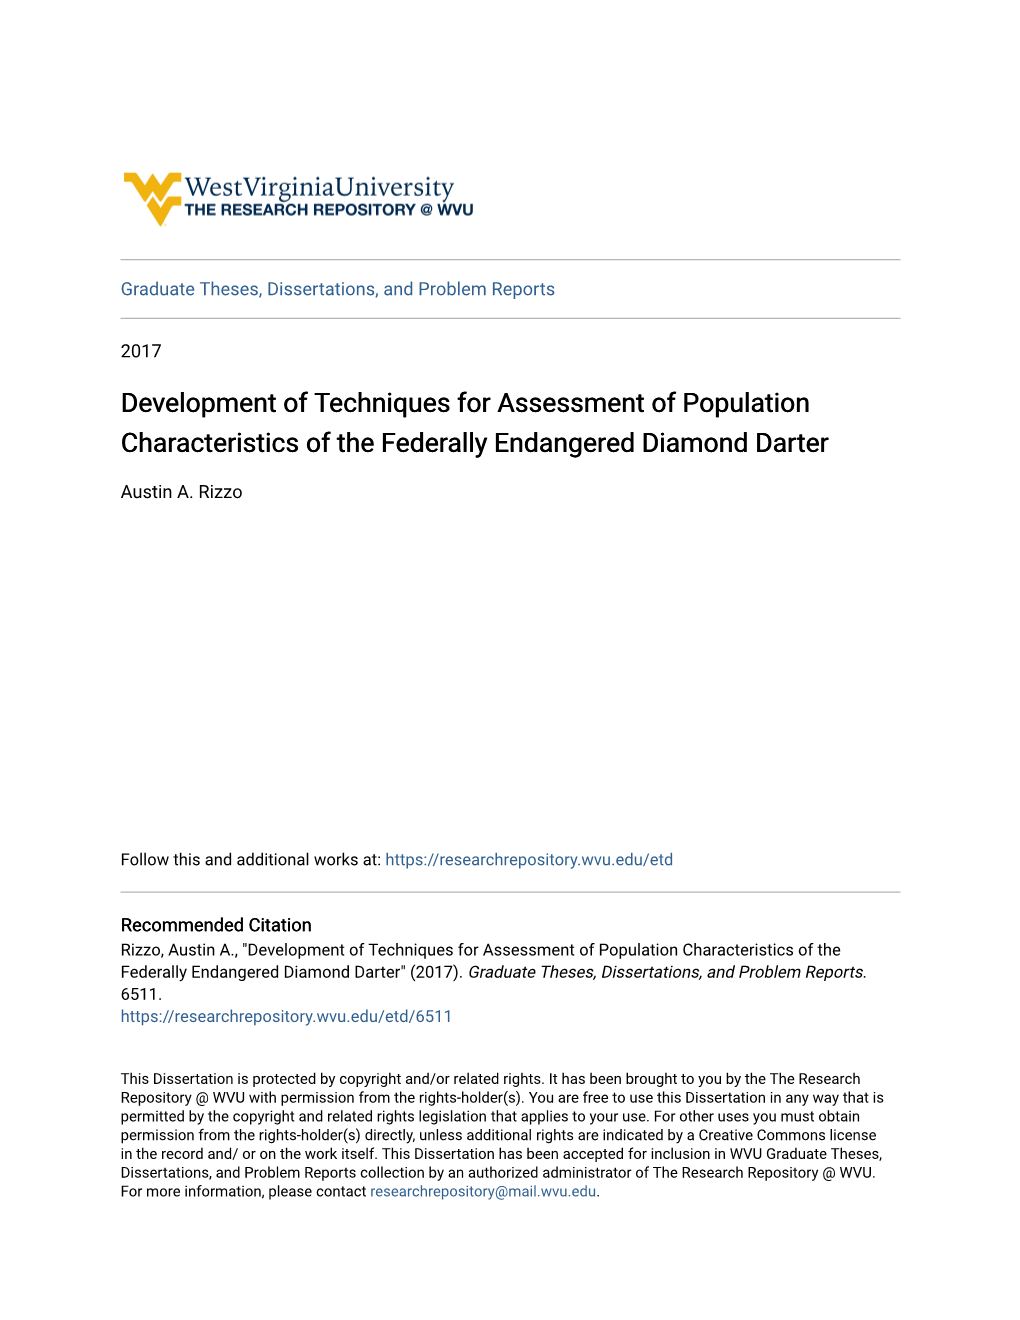 Development of Techniques for Assessment of Population Characteristics of the Federally Endangered Diamond Darter